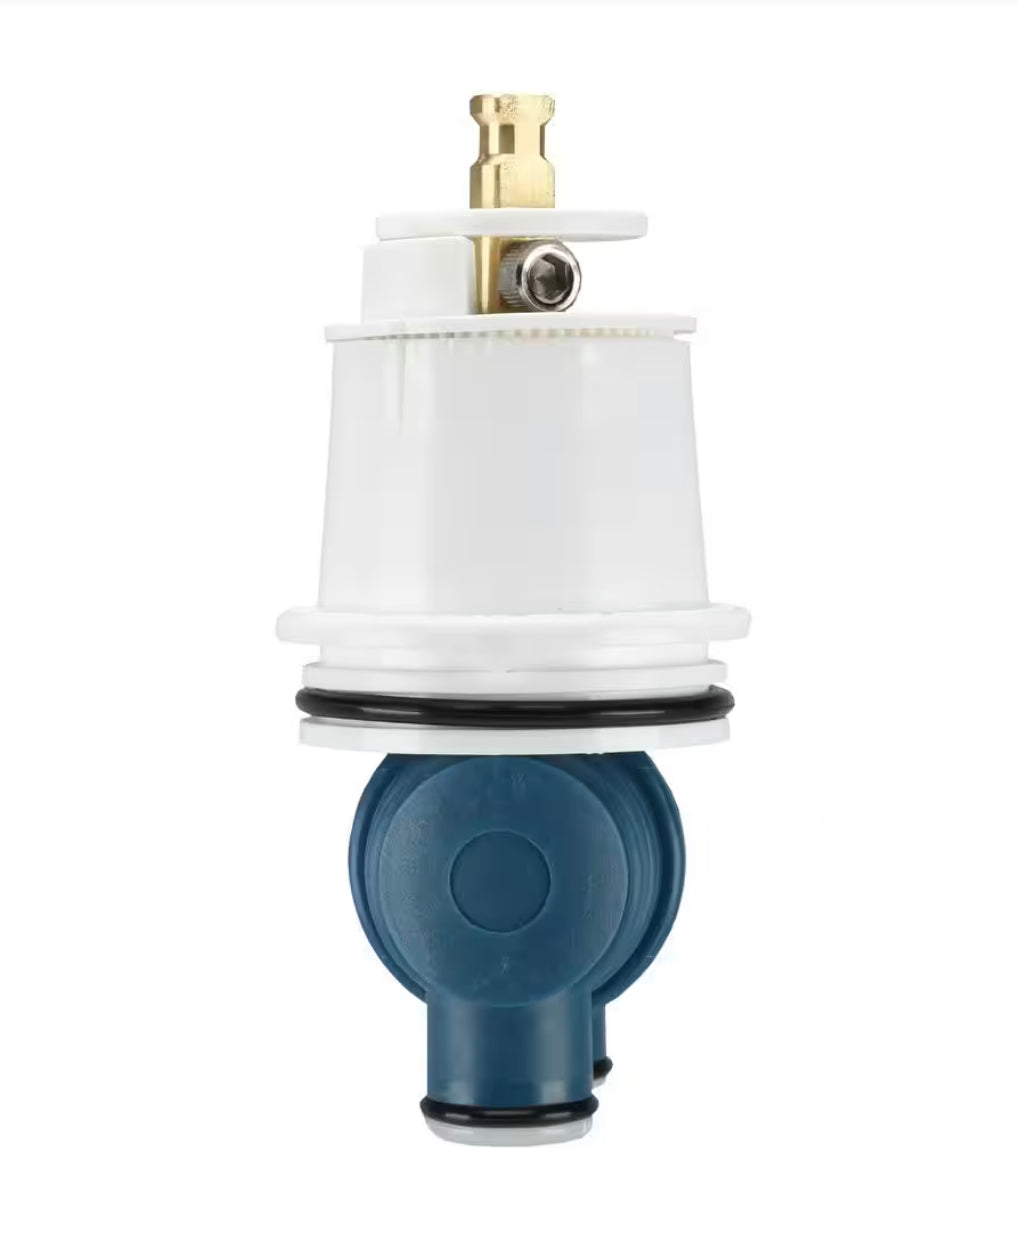 Danco 1.91 in Replacement Cartridge for Delta Monitor Faucet Damaged Box